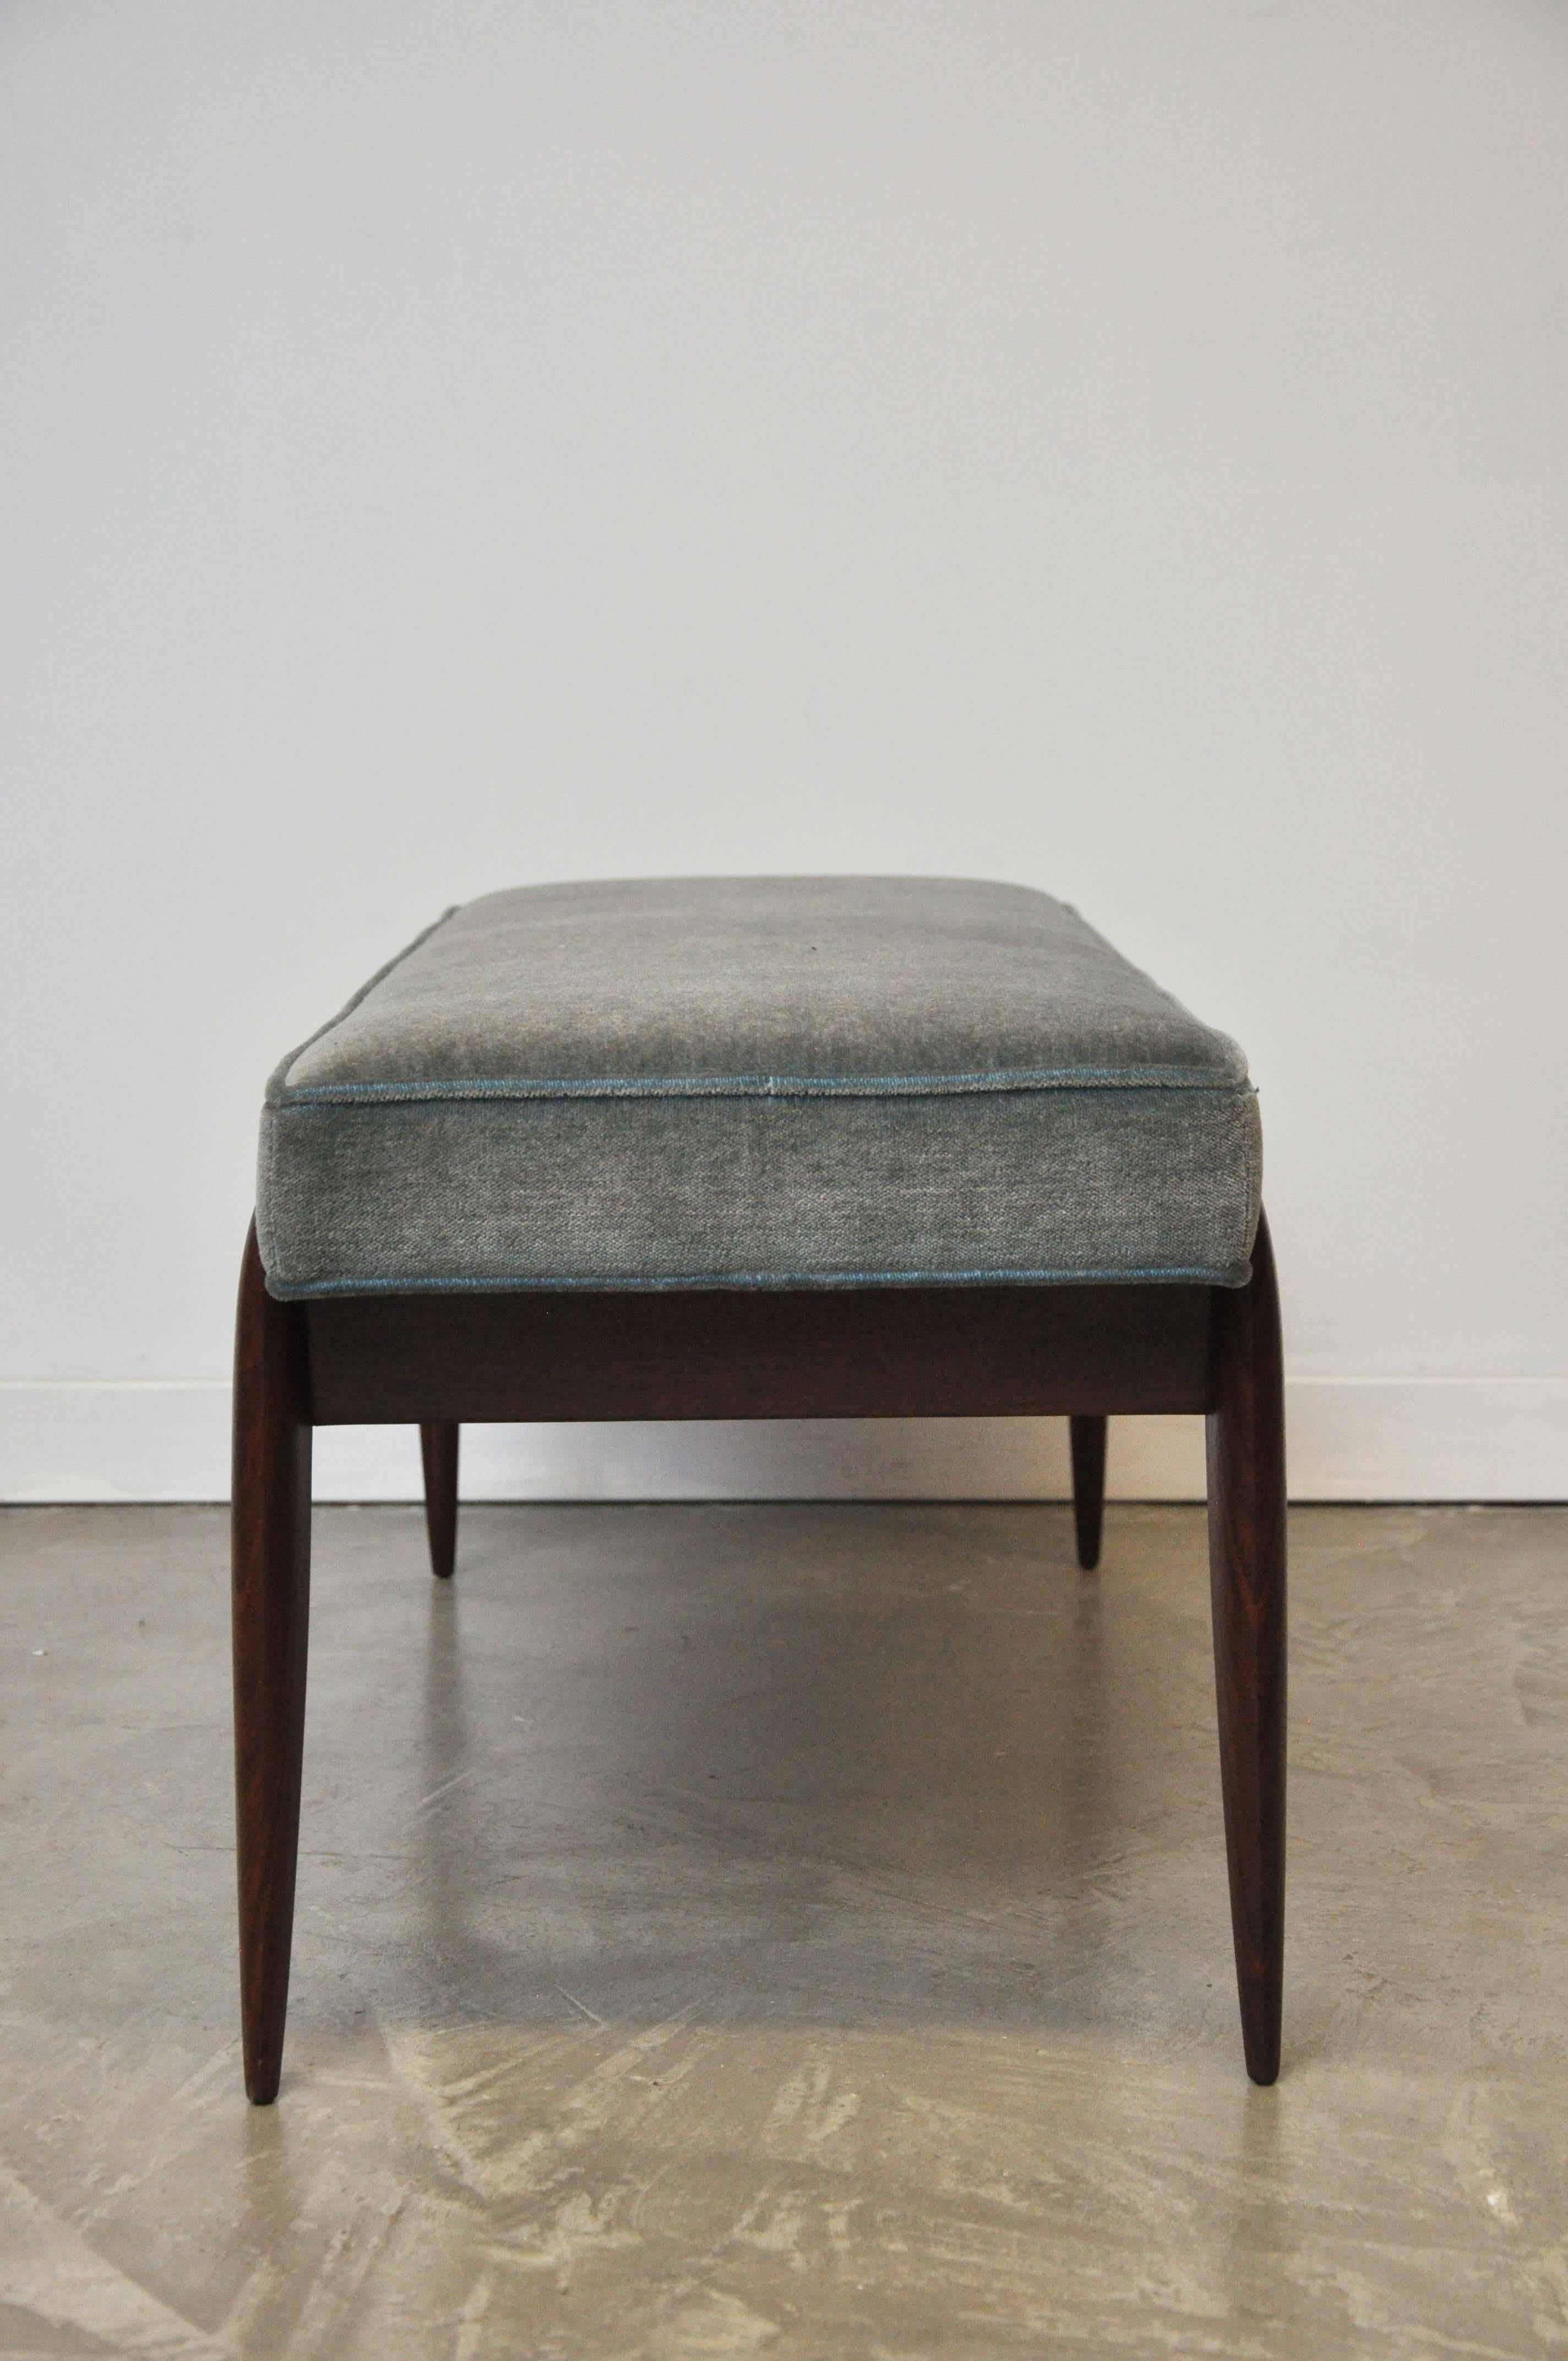 Mohair Rare Gio Ponti Bench for M. Singer and Sons